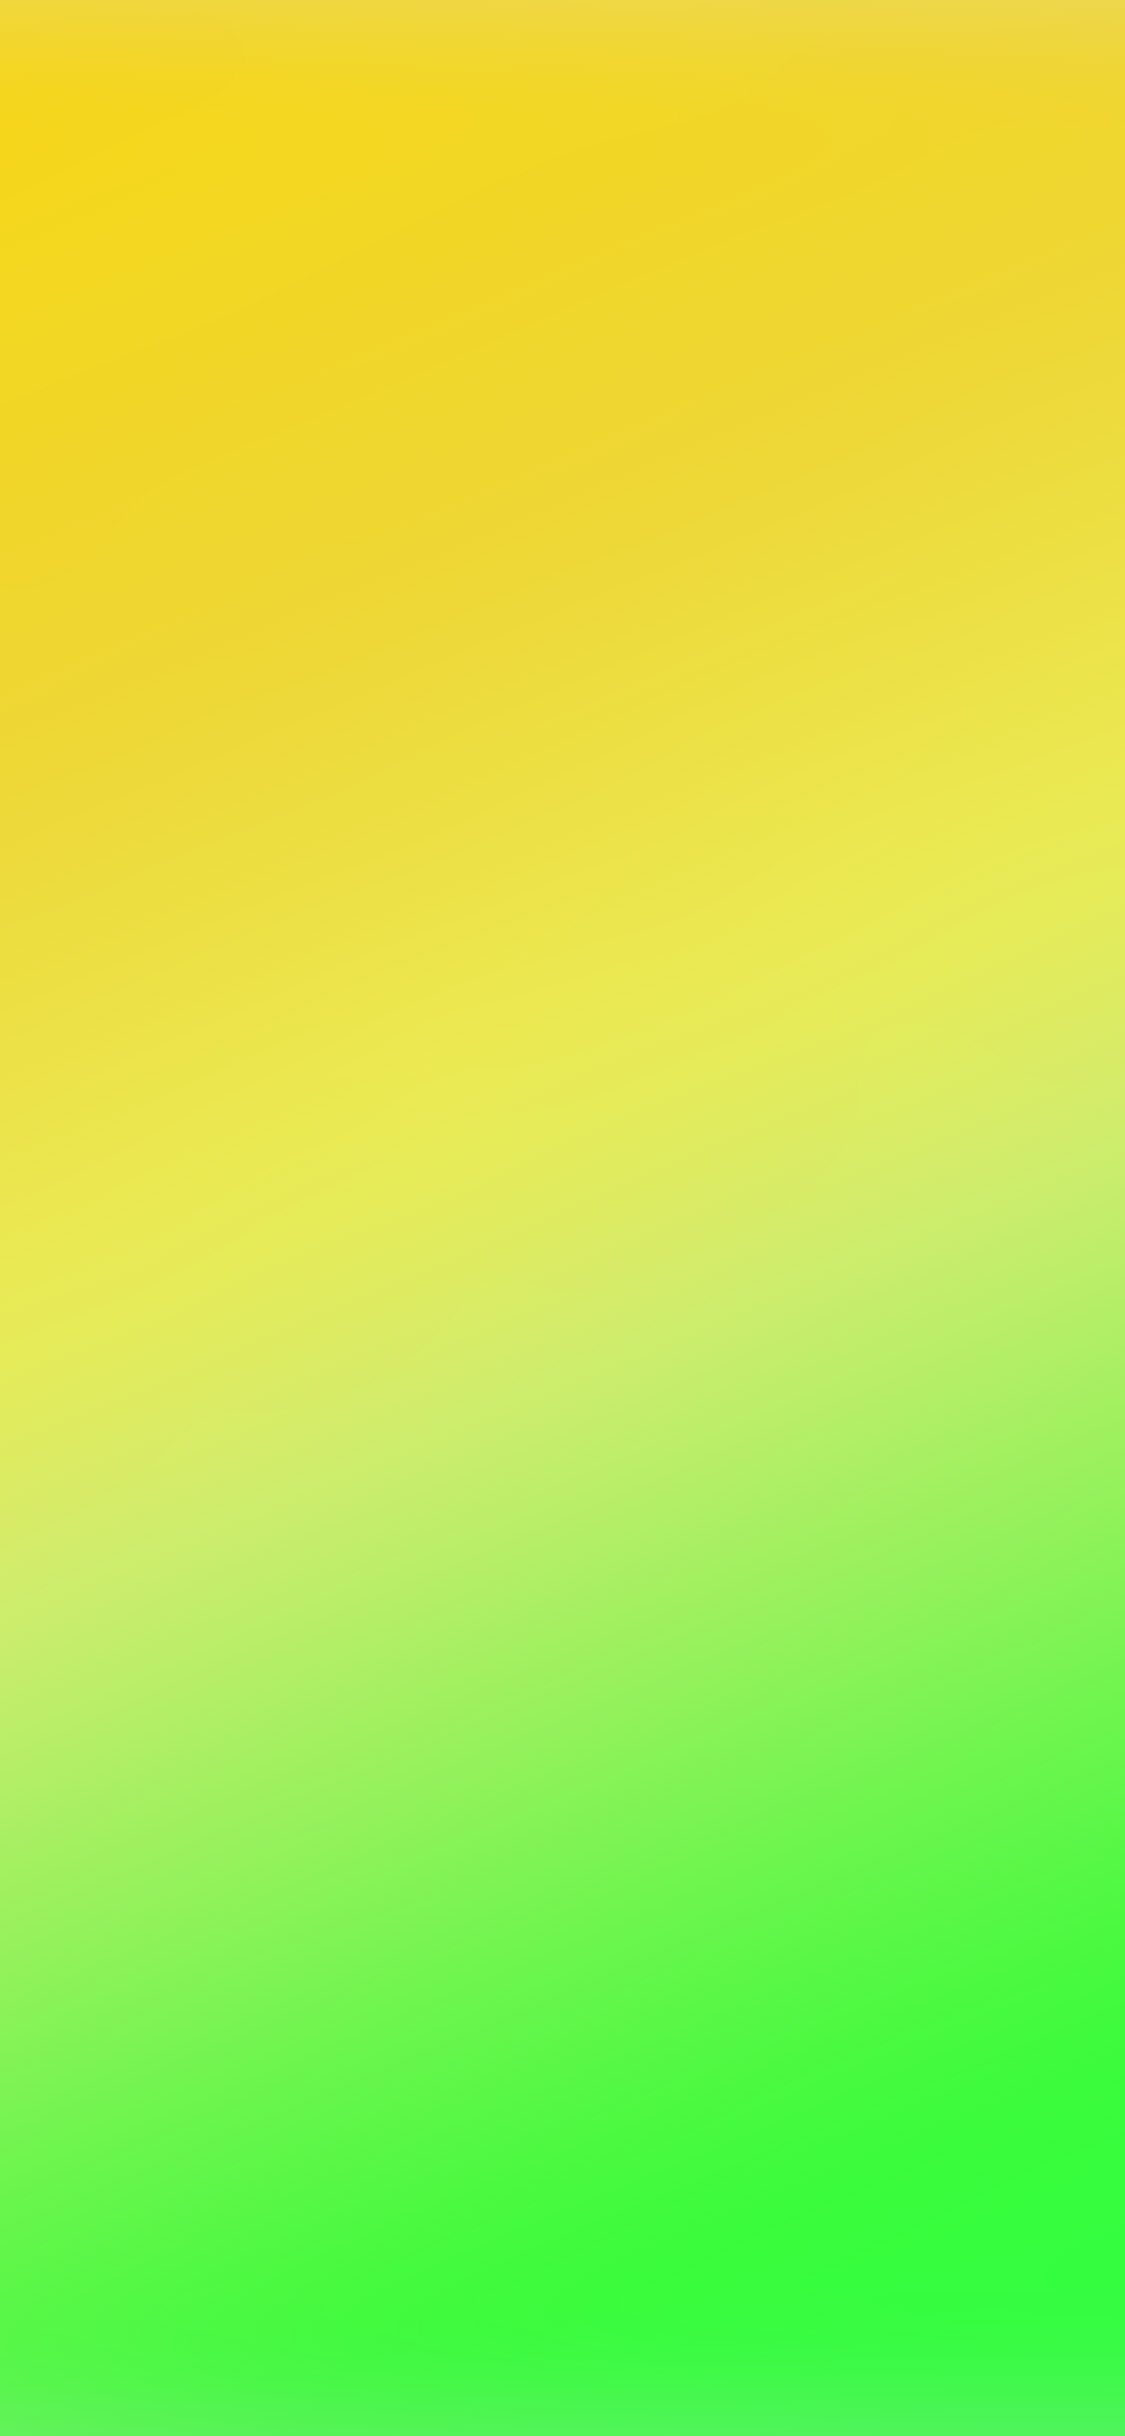 Yellow Green Blur Gradation iPhone X Wallpapers Free Download